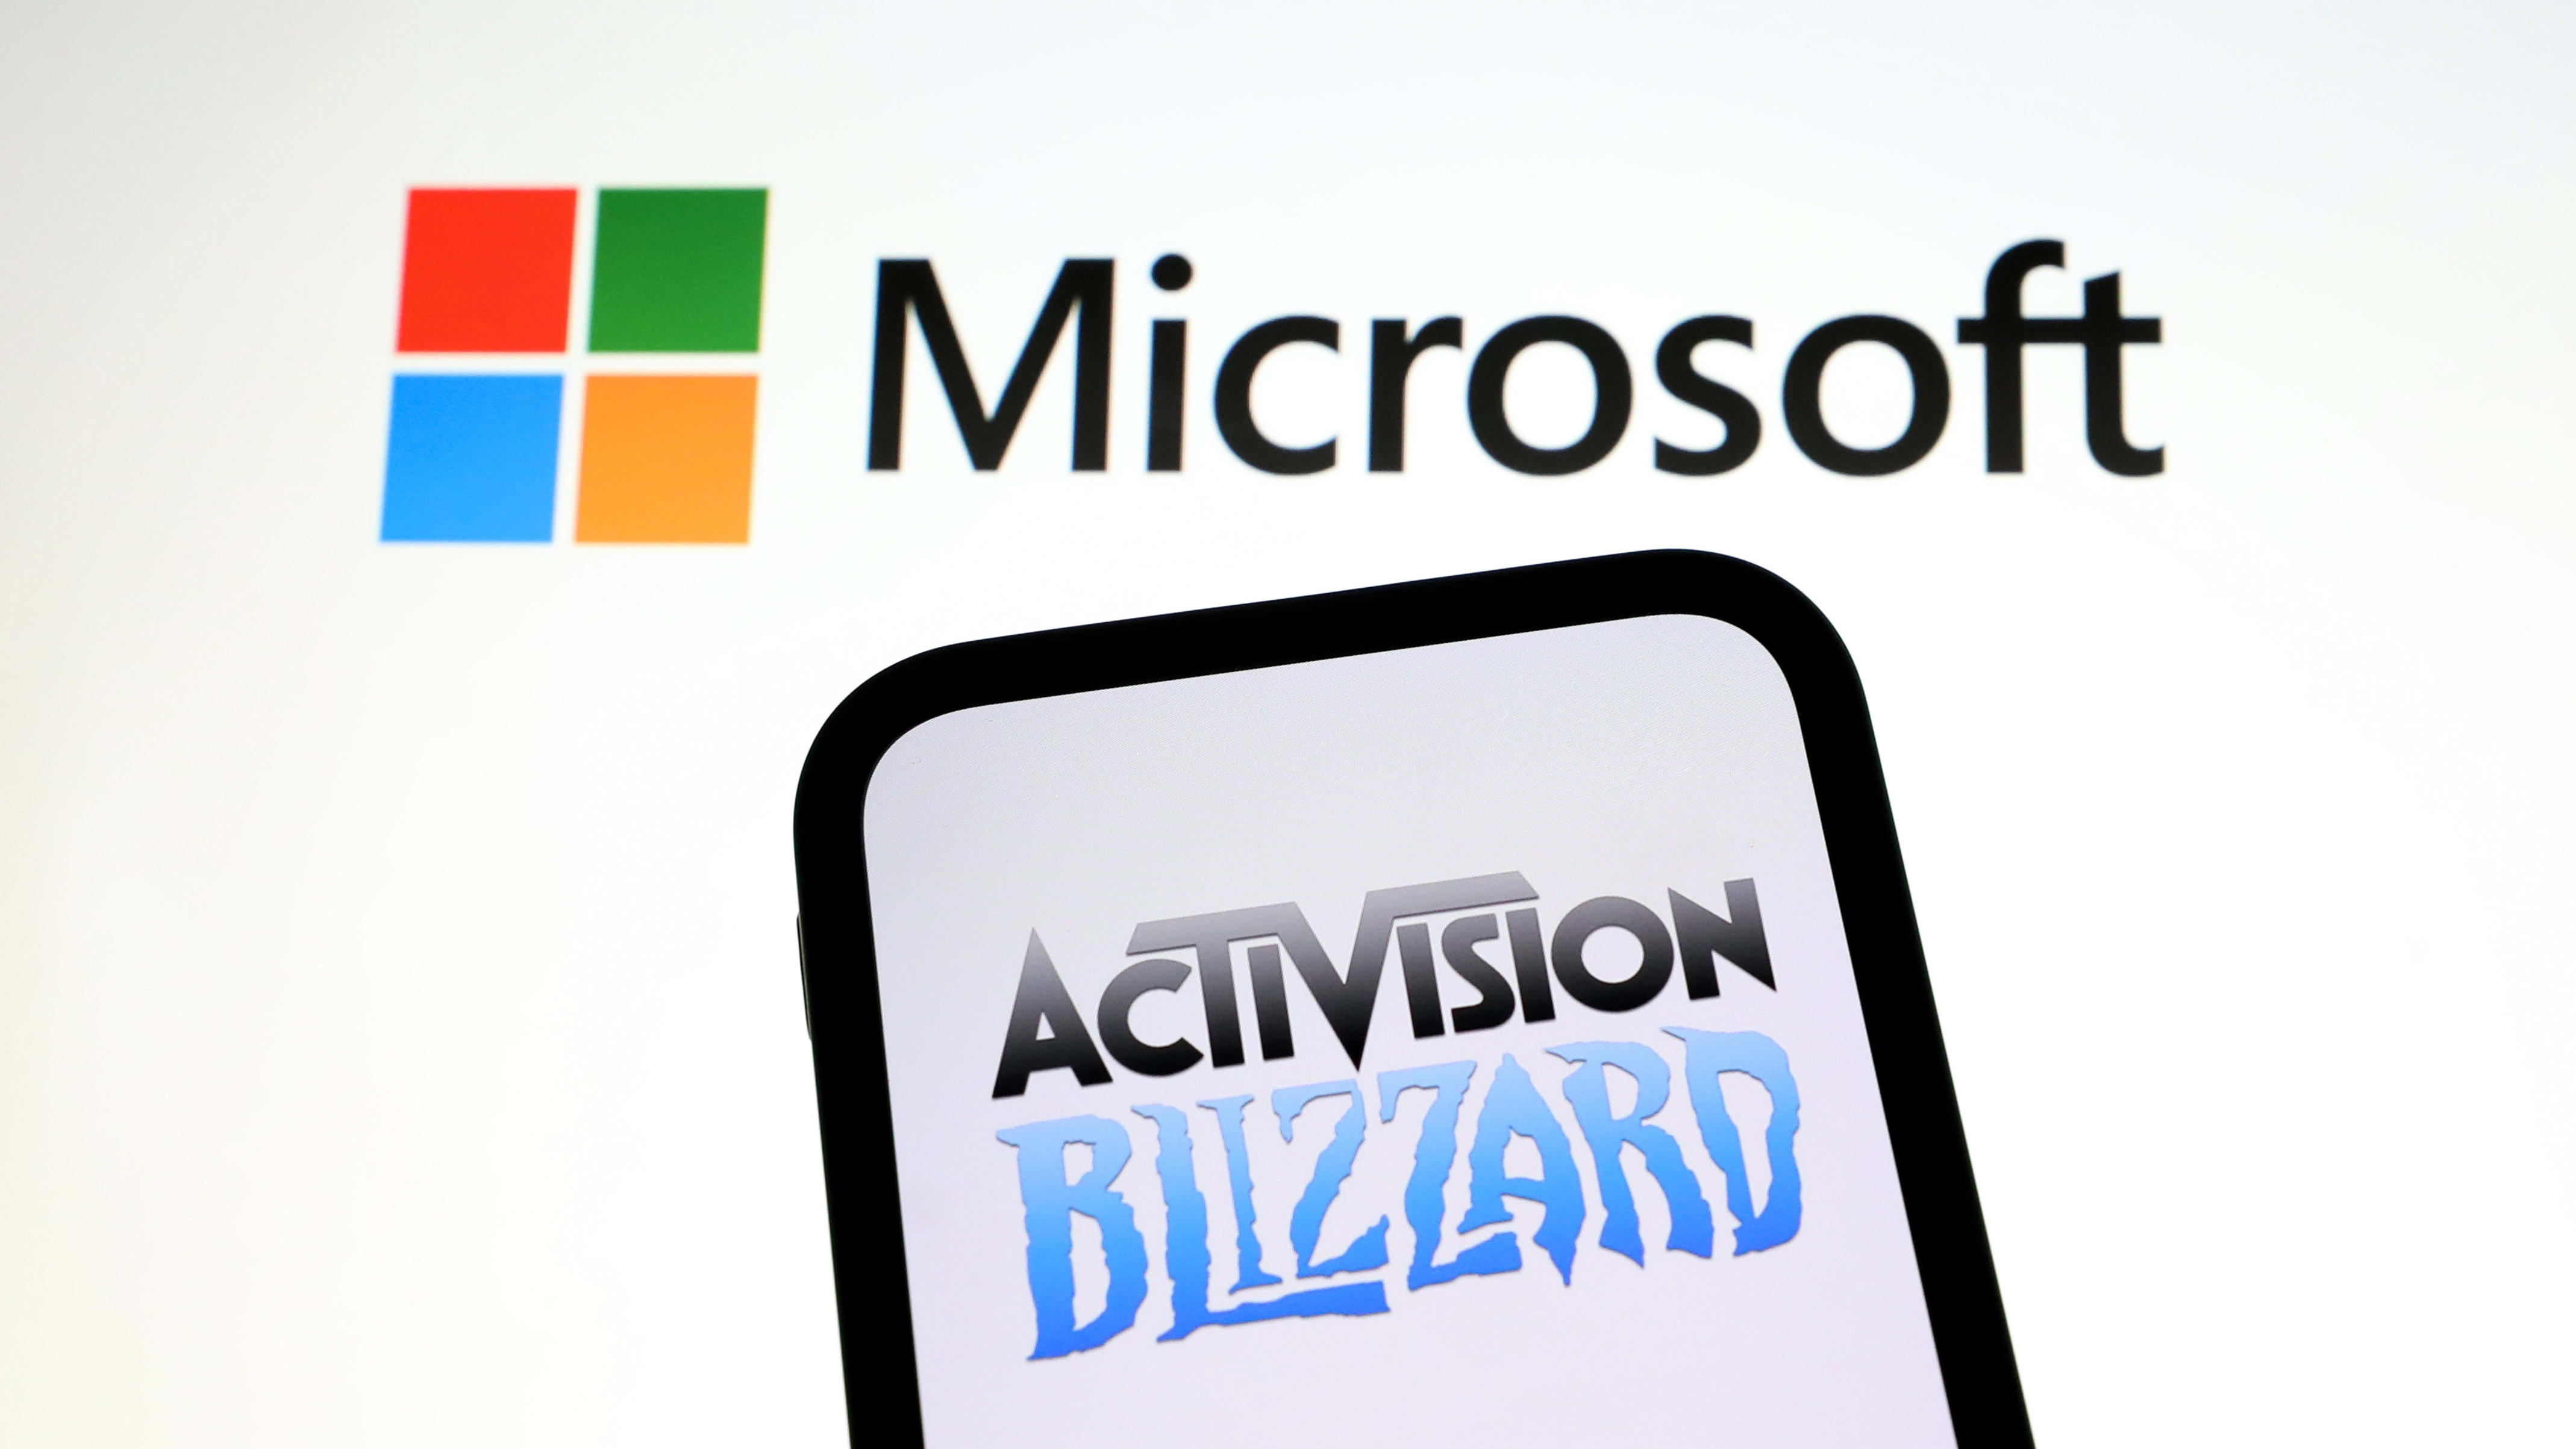 The EU might need to reassess Microsoft's Activision Blizzard deal after  restructuring - The Verge